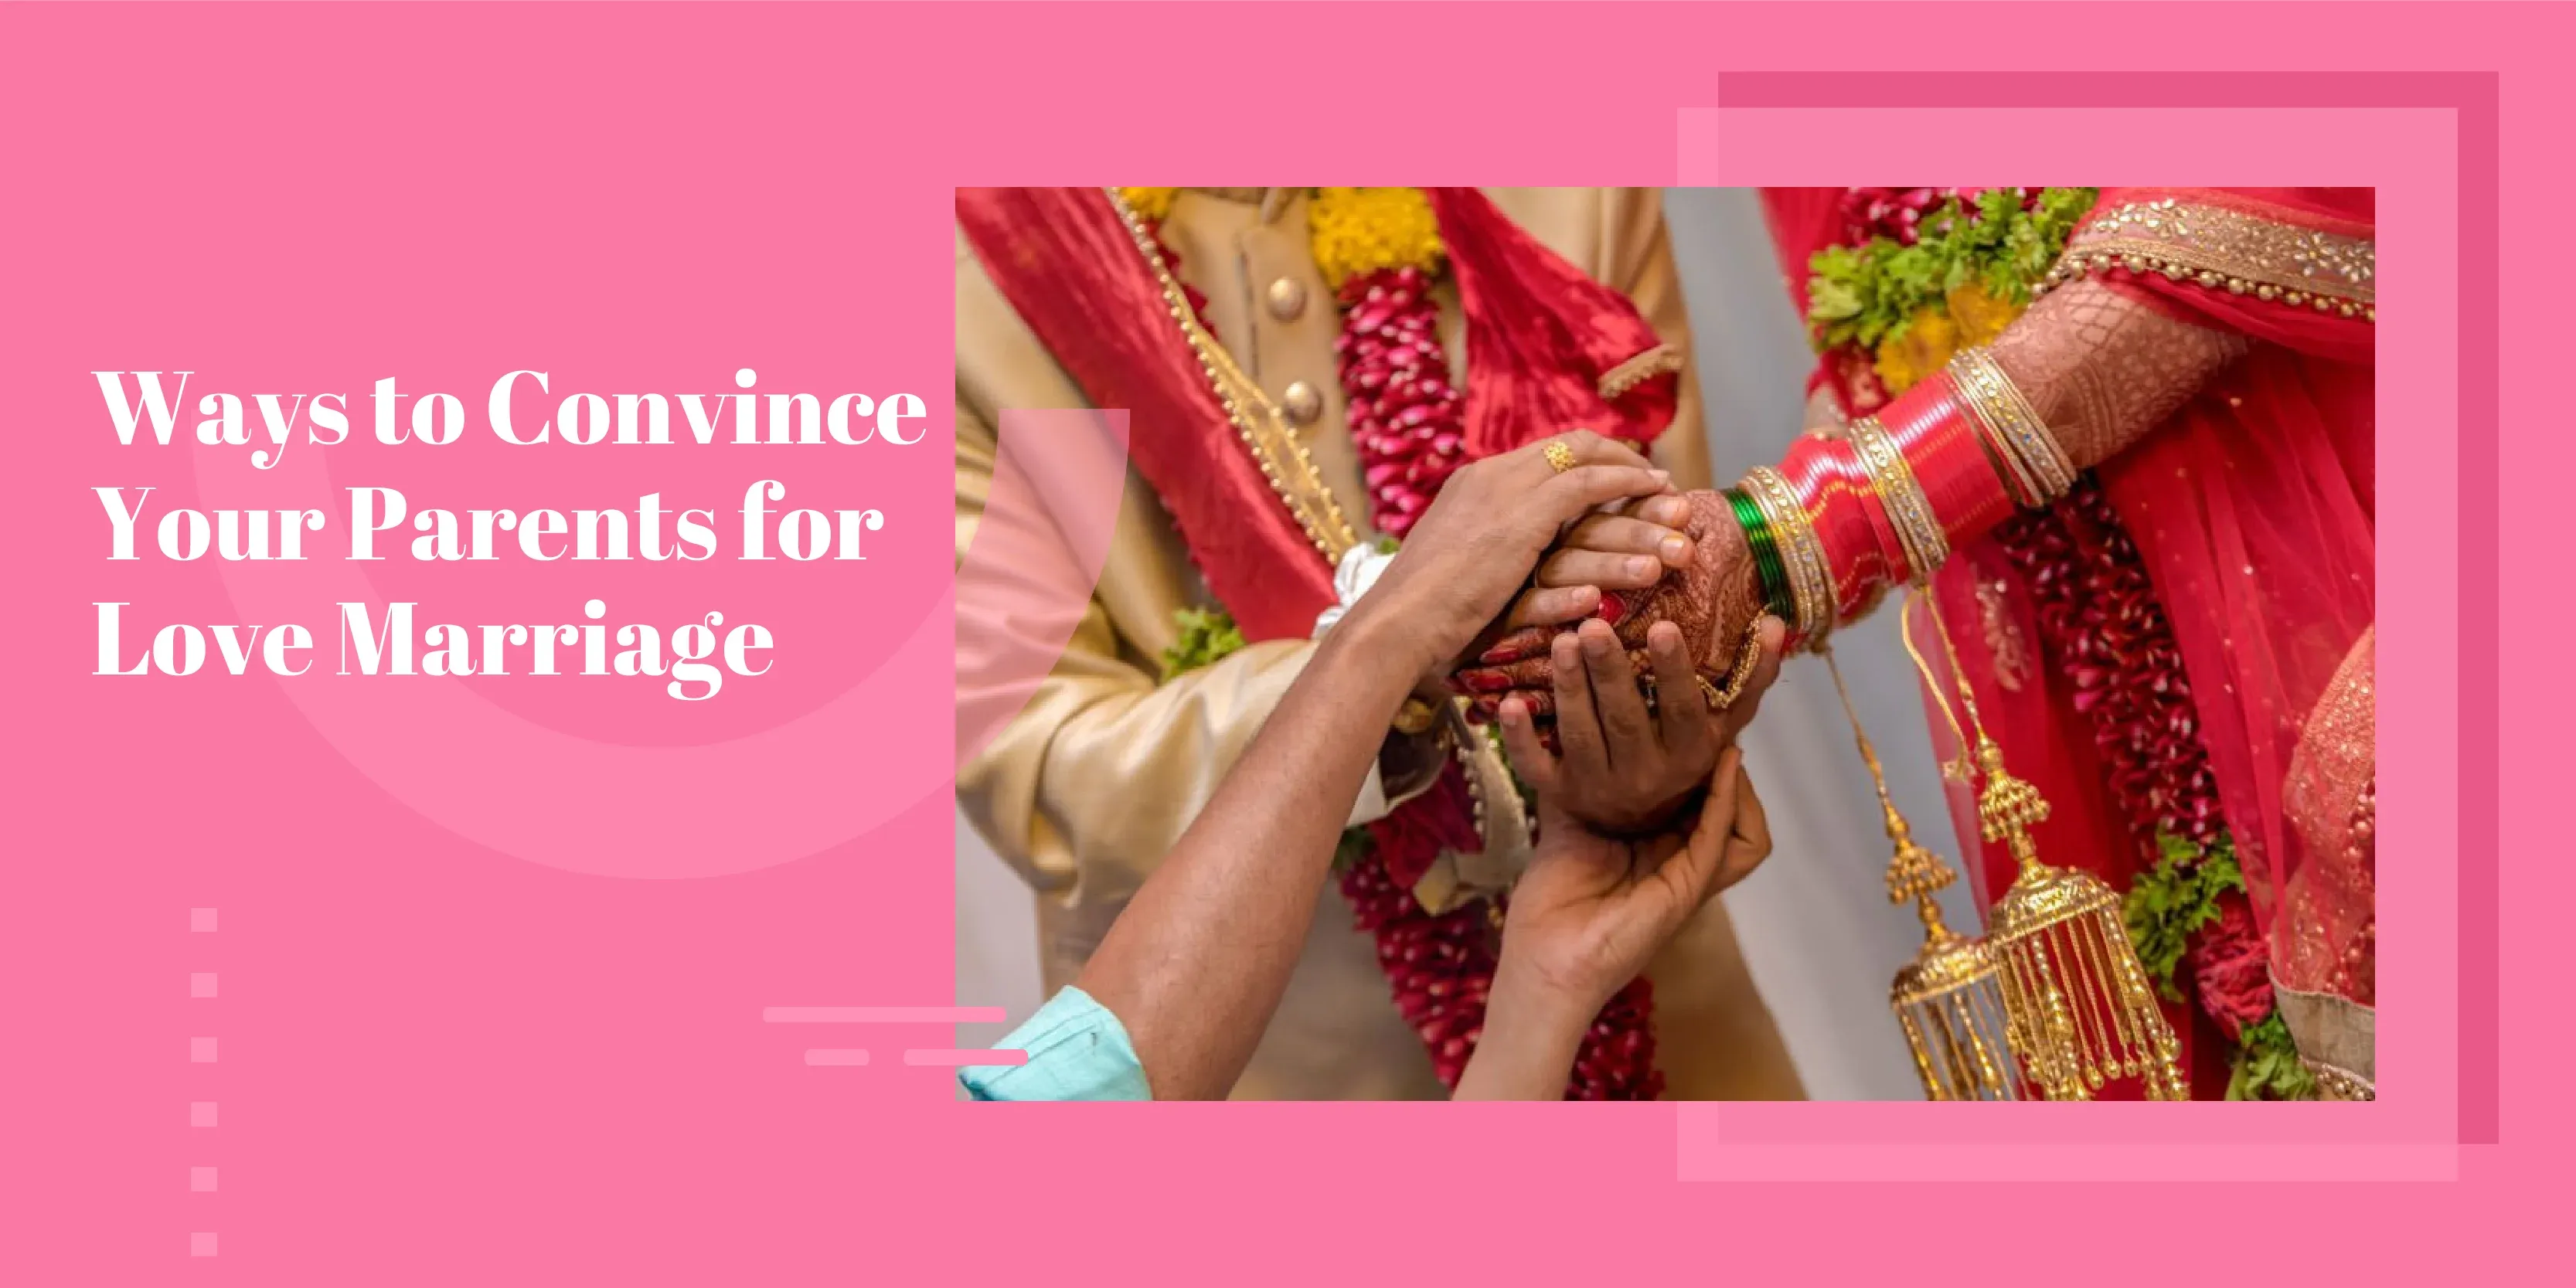 Ways to Convince Parents for Love Marriage